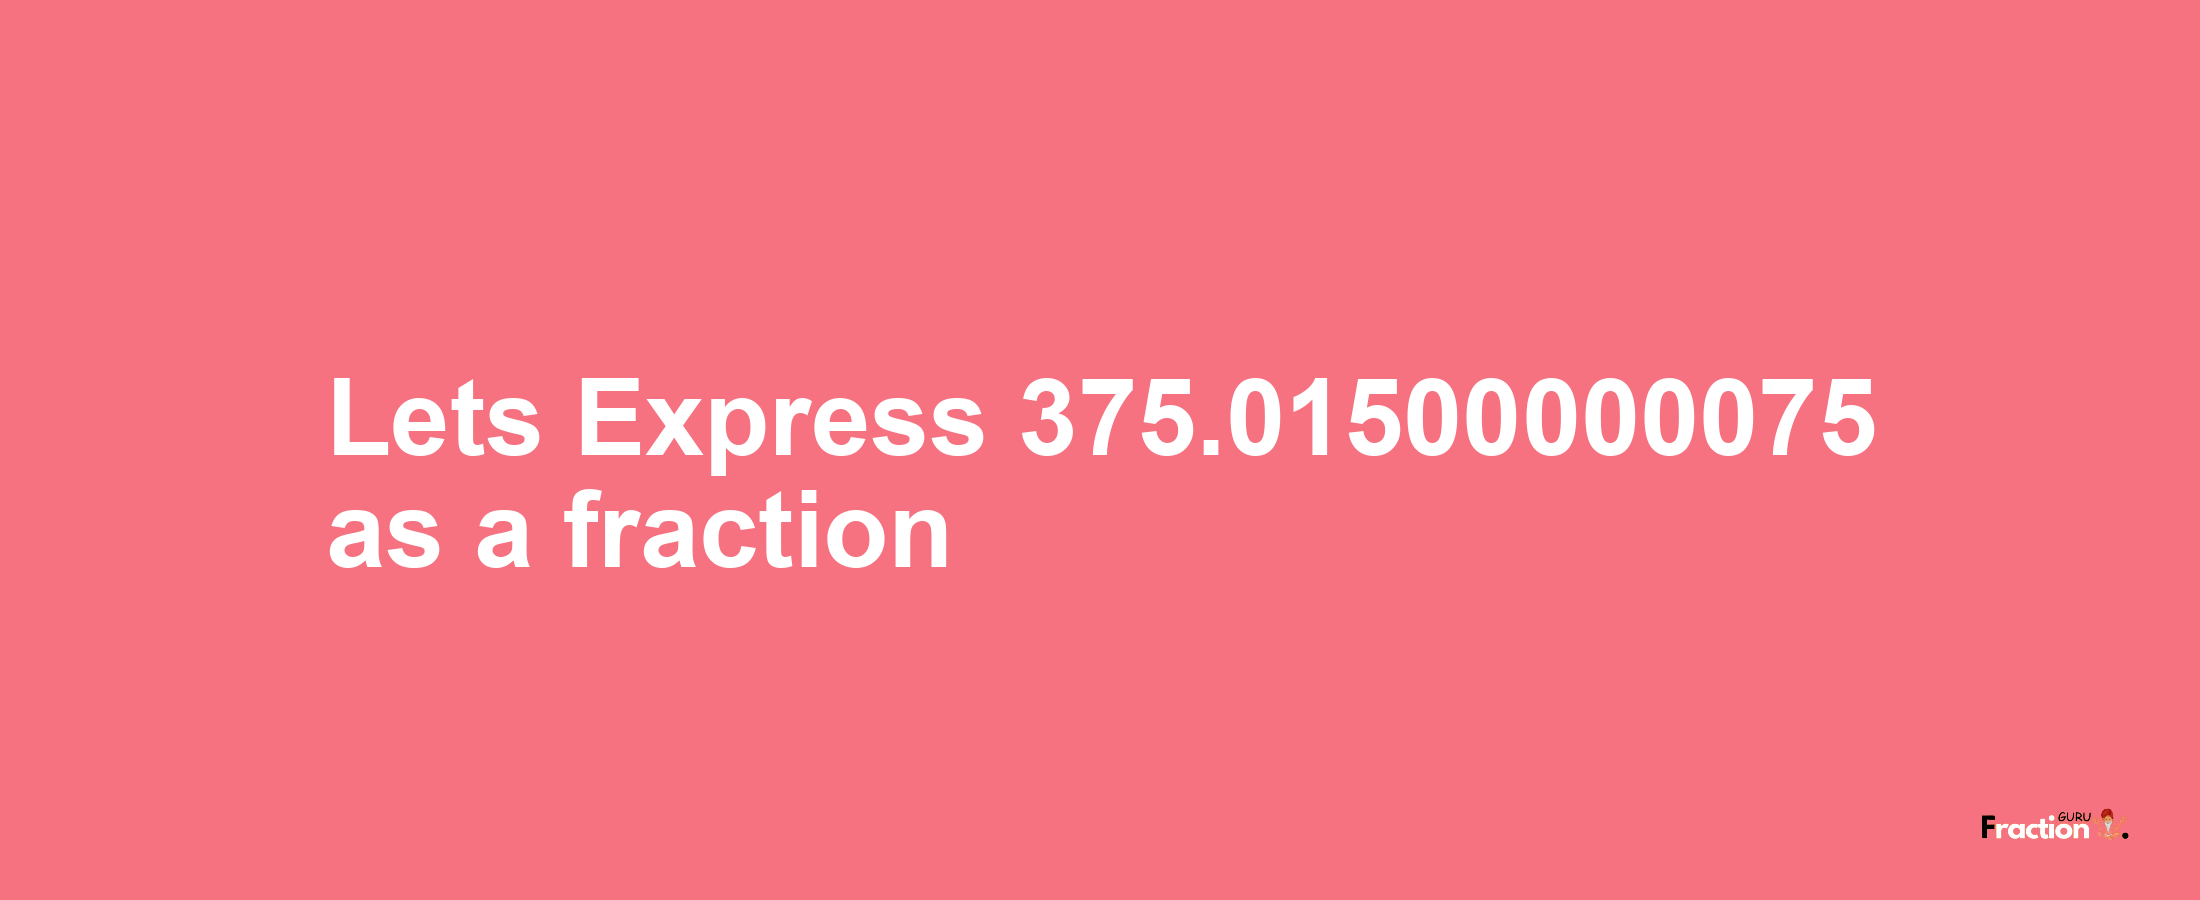 Lets Express 375.01500000075 as afraction